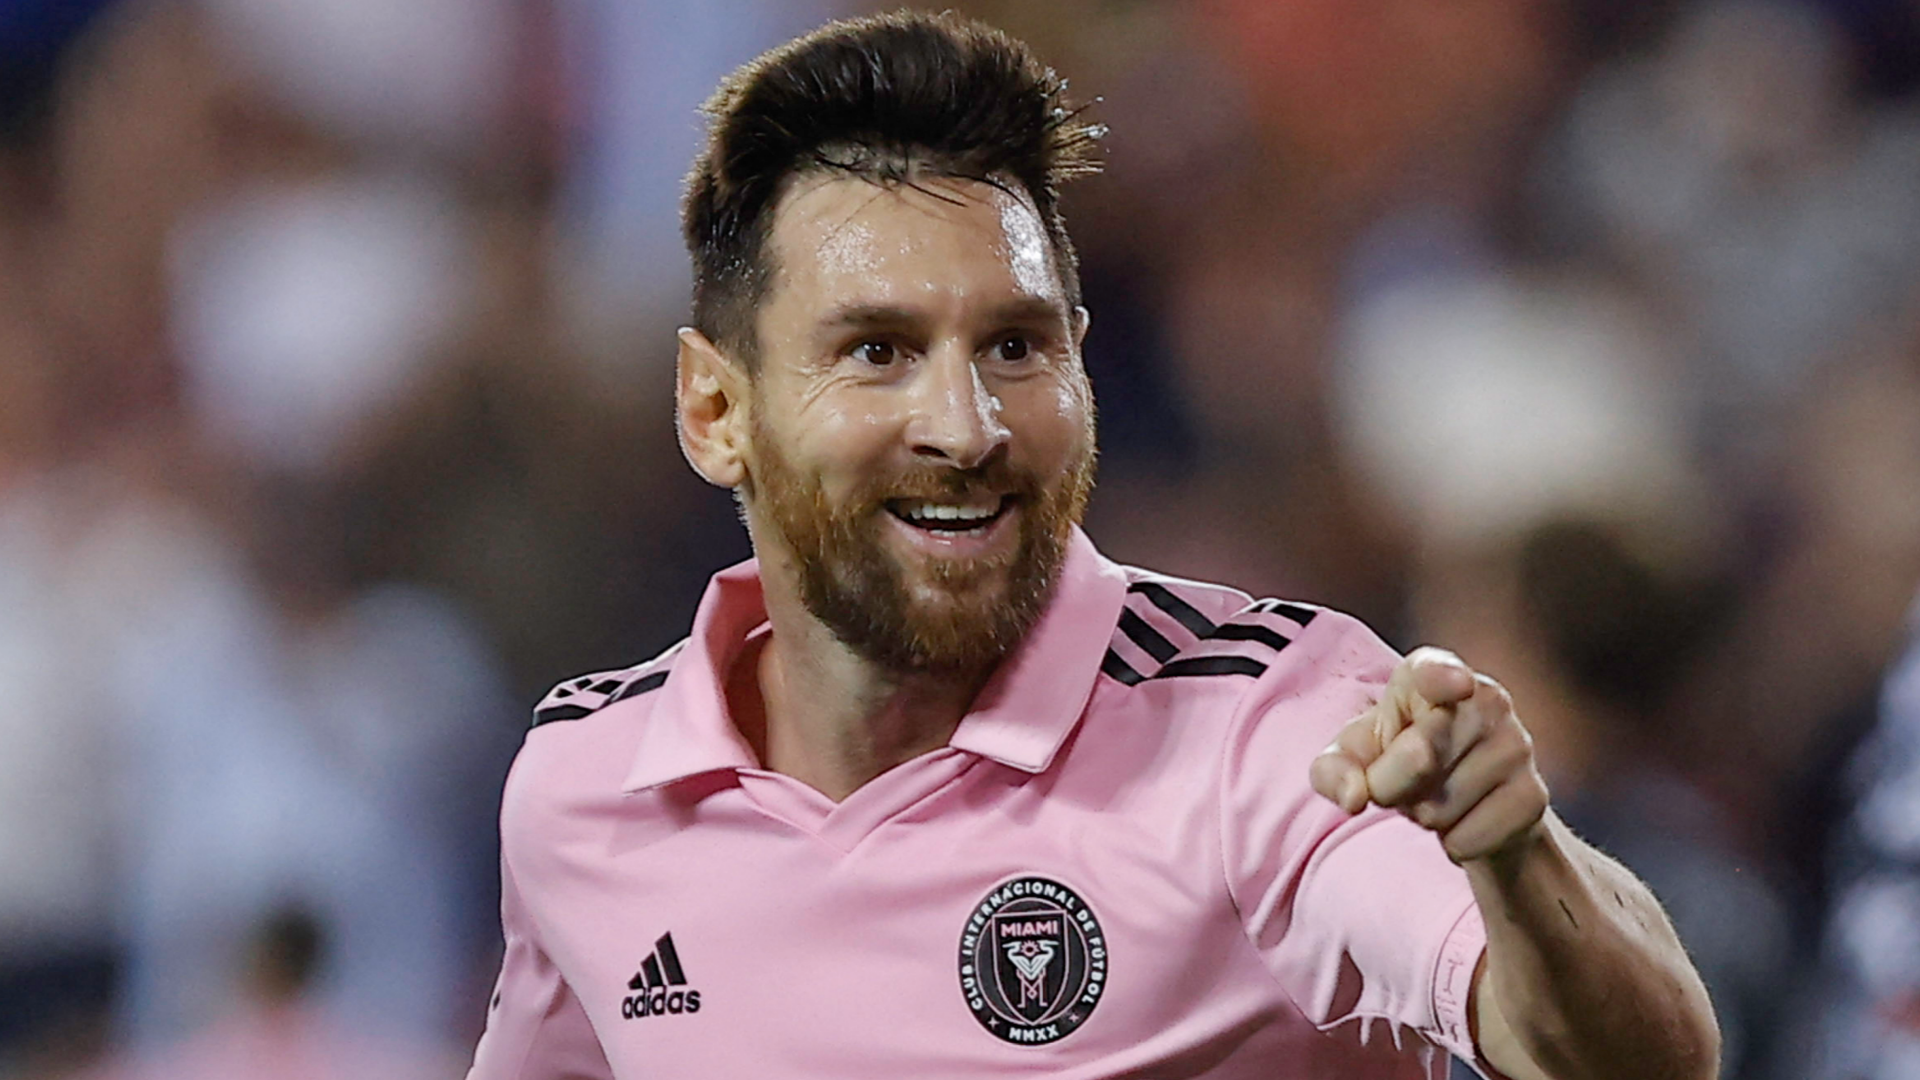 ‘It’s a trophy!’ - MLS stars react to Lionel Messi shirt swaps after seeing Inter Miami superstar hand out 12 jerseys